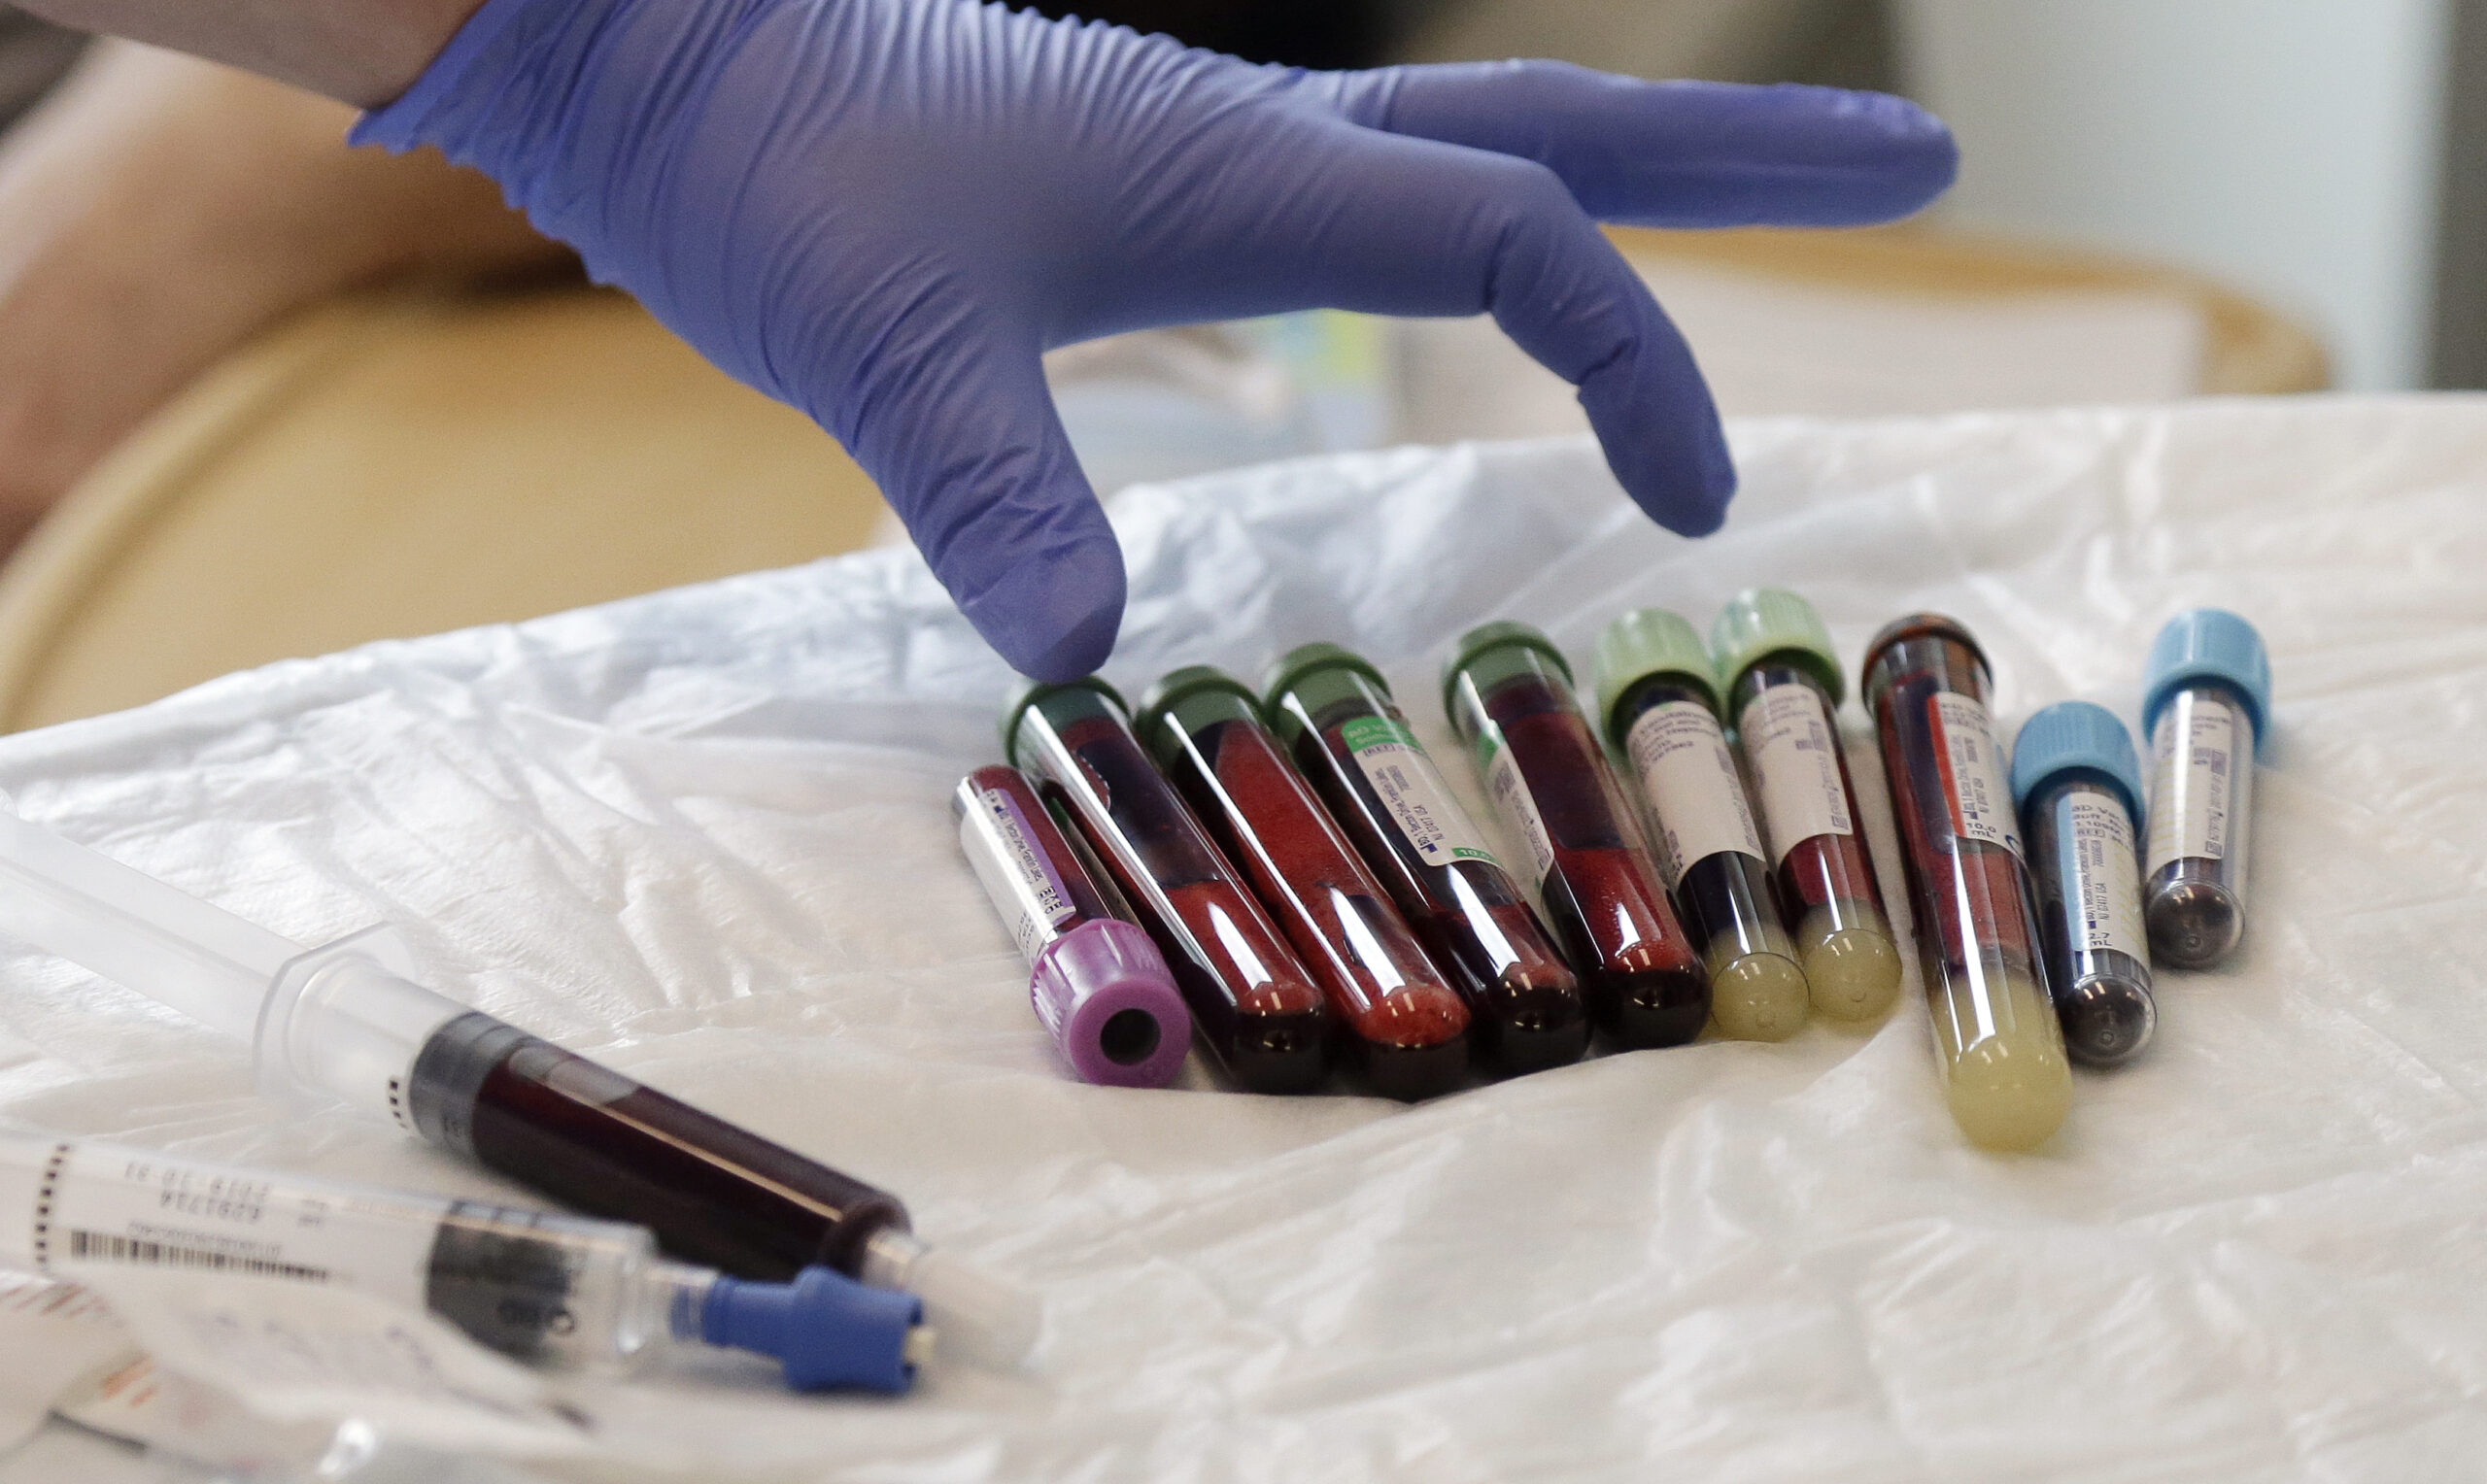 Test tubes of blood with different colored lids lay on a white sheet